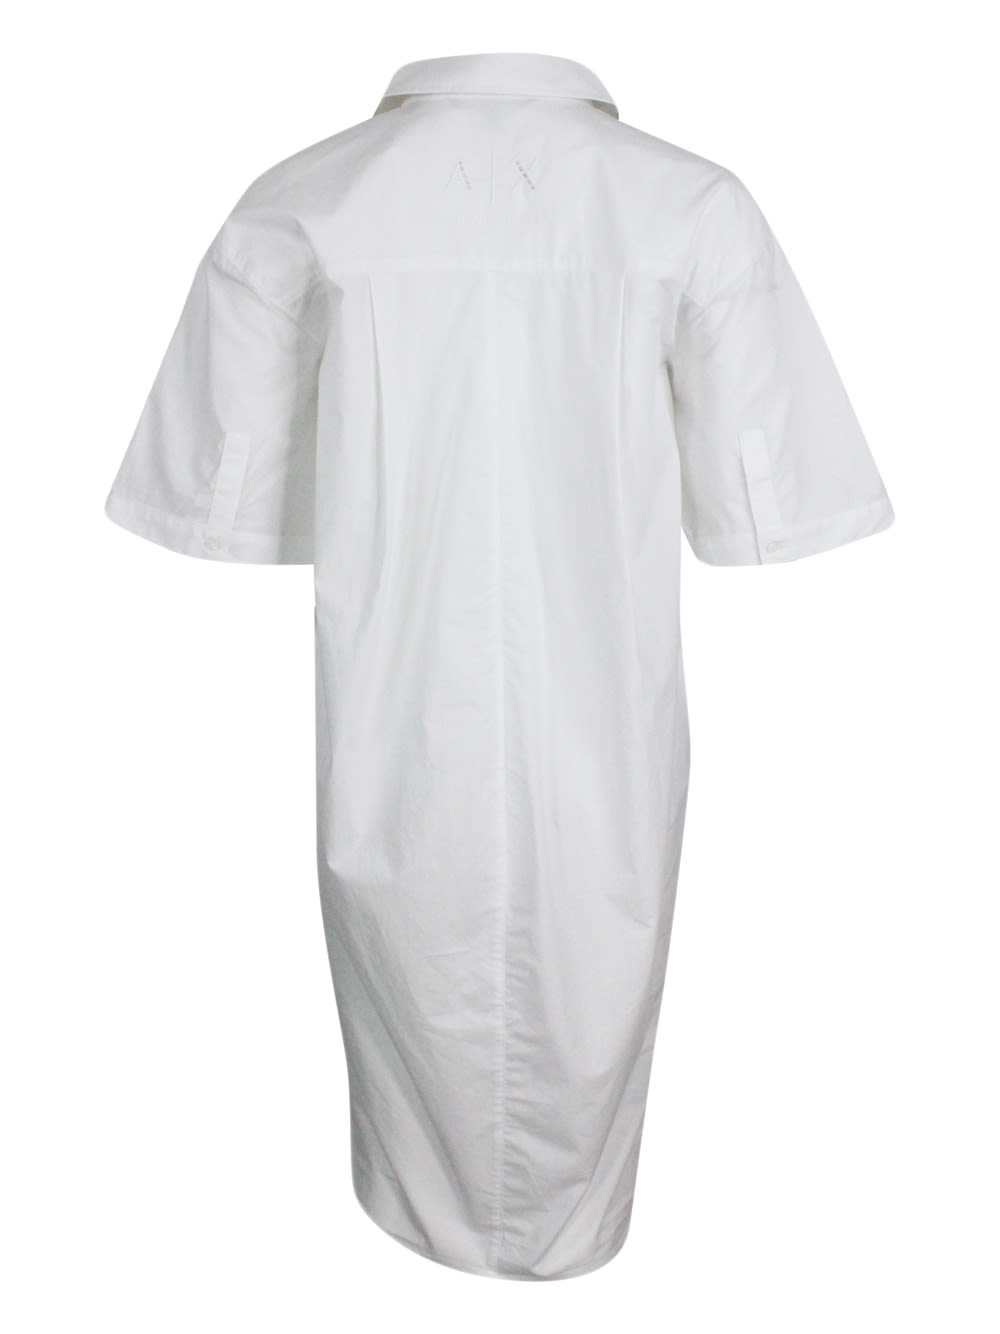 Shop Armani Collezioni Dress Made Of Soft Cotton With Short Sleeves, With Collar And 4 Button Closure. Side Slits On The Bo In White